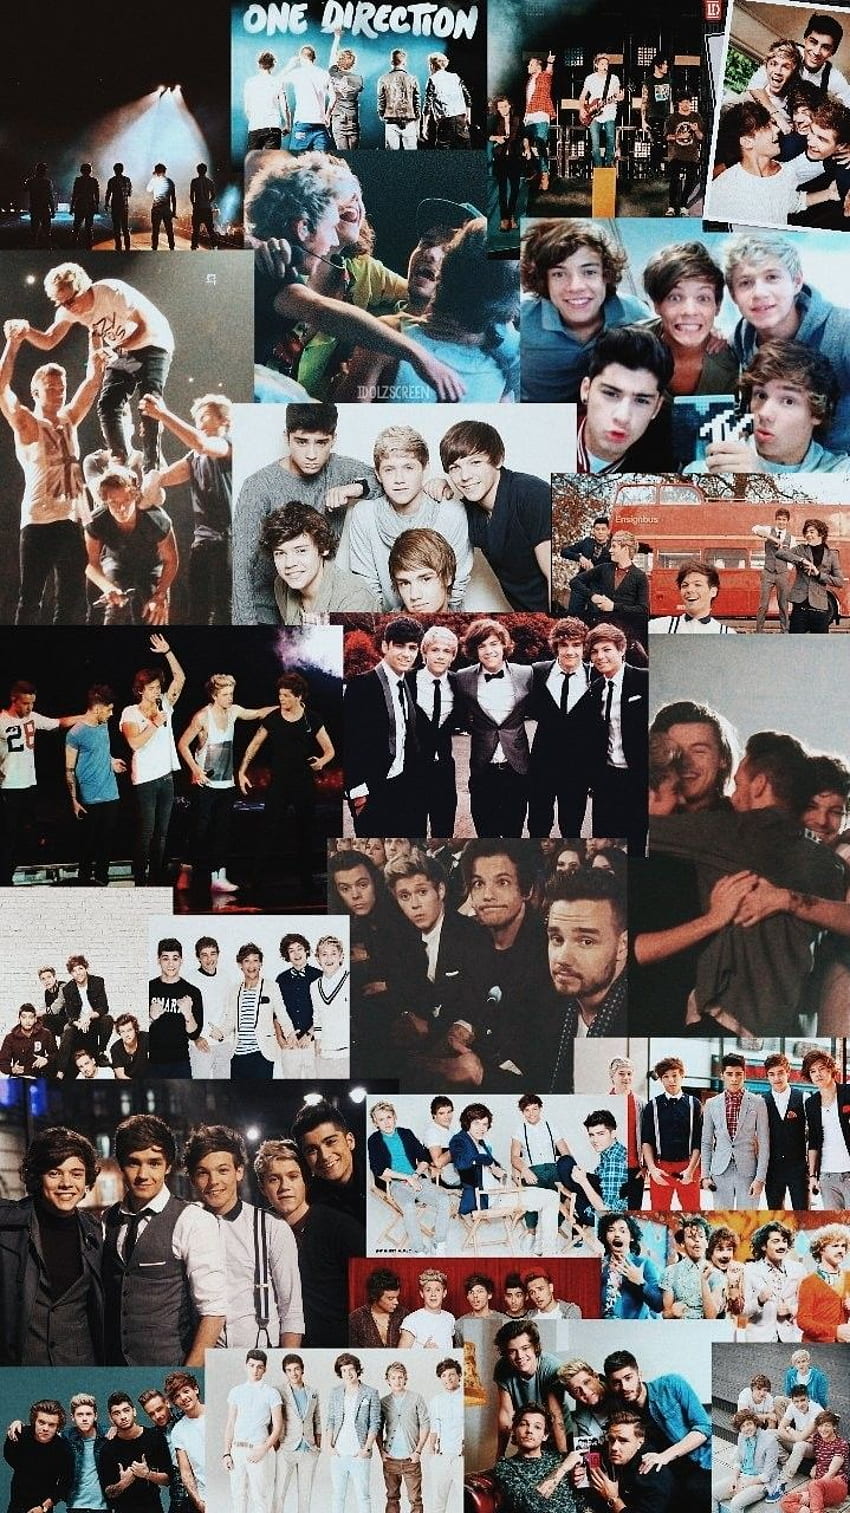 One Direction - , One Direction Background on Bat, One Direction Concert HD phone wallpaper